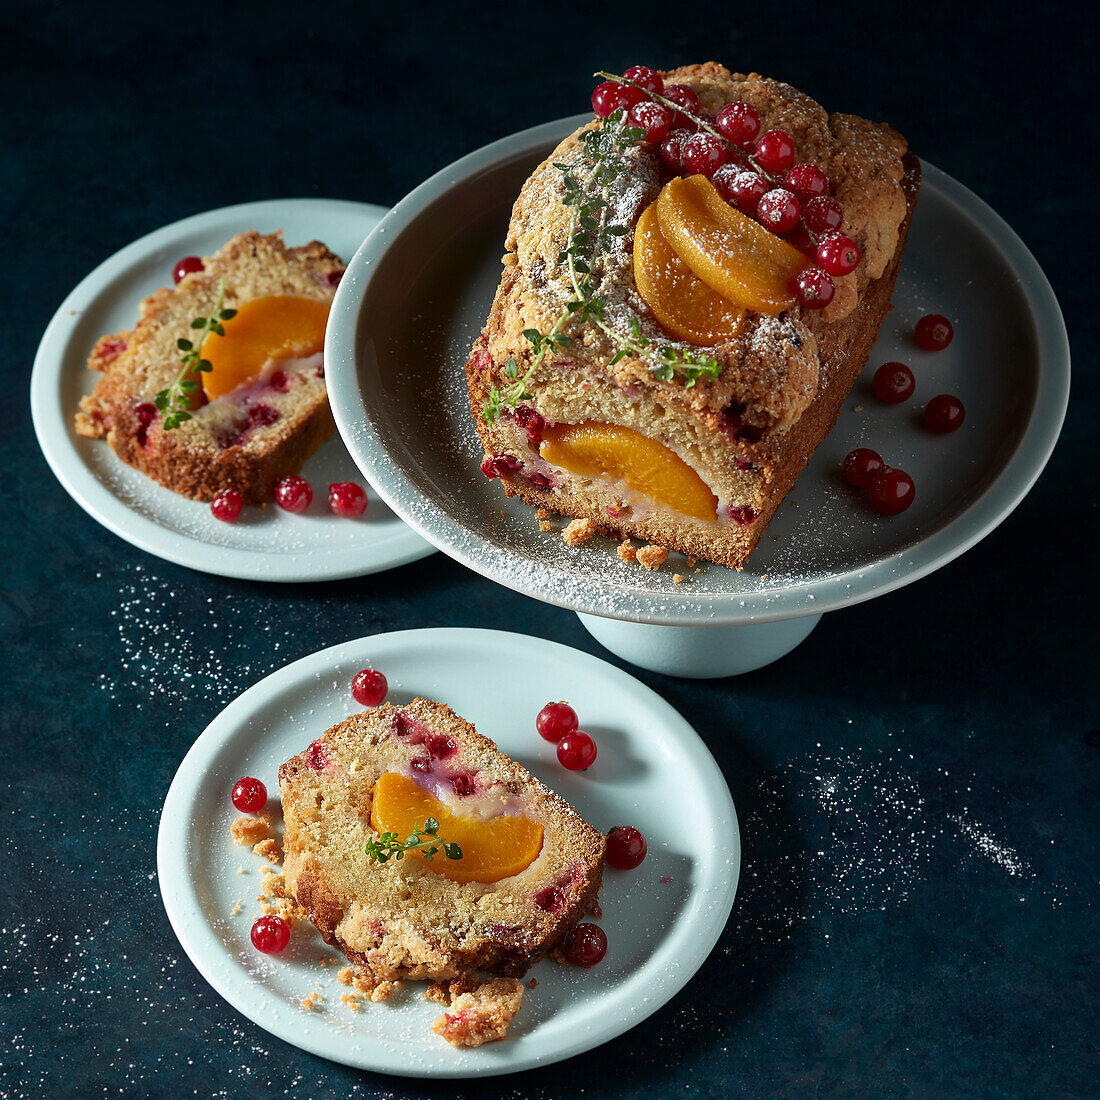 Crumble cake with peaches and currants